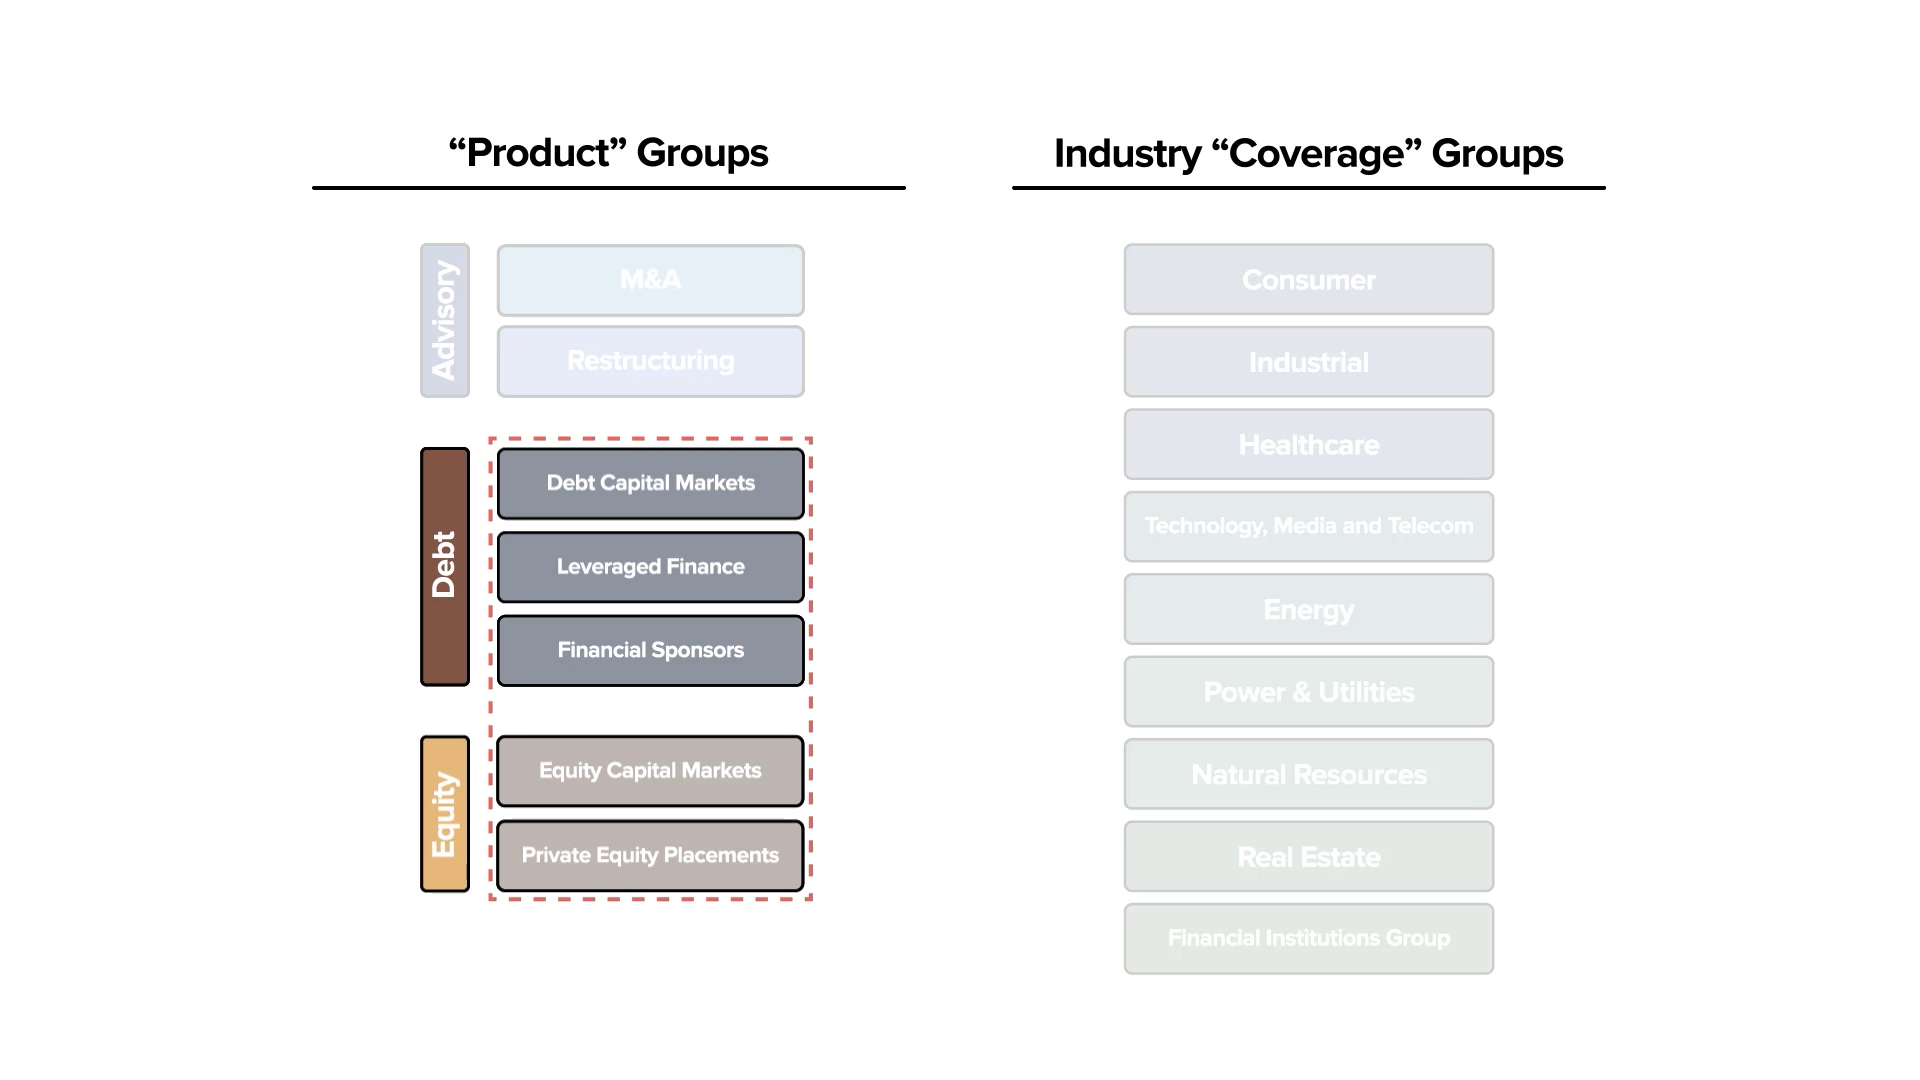 An image Highlighting the typical Debt and Equity Product groups within an Investment Bank